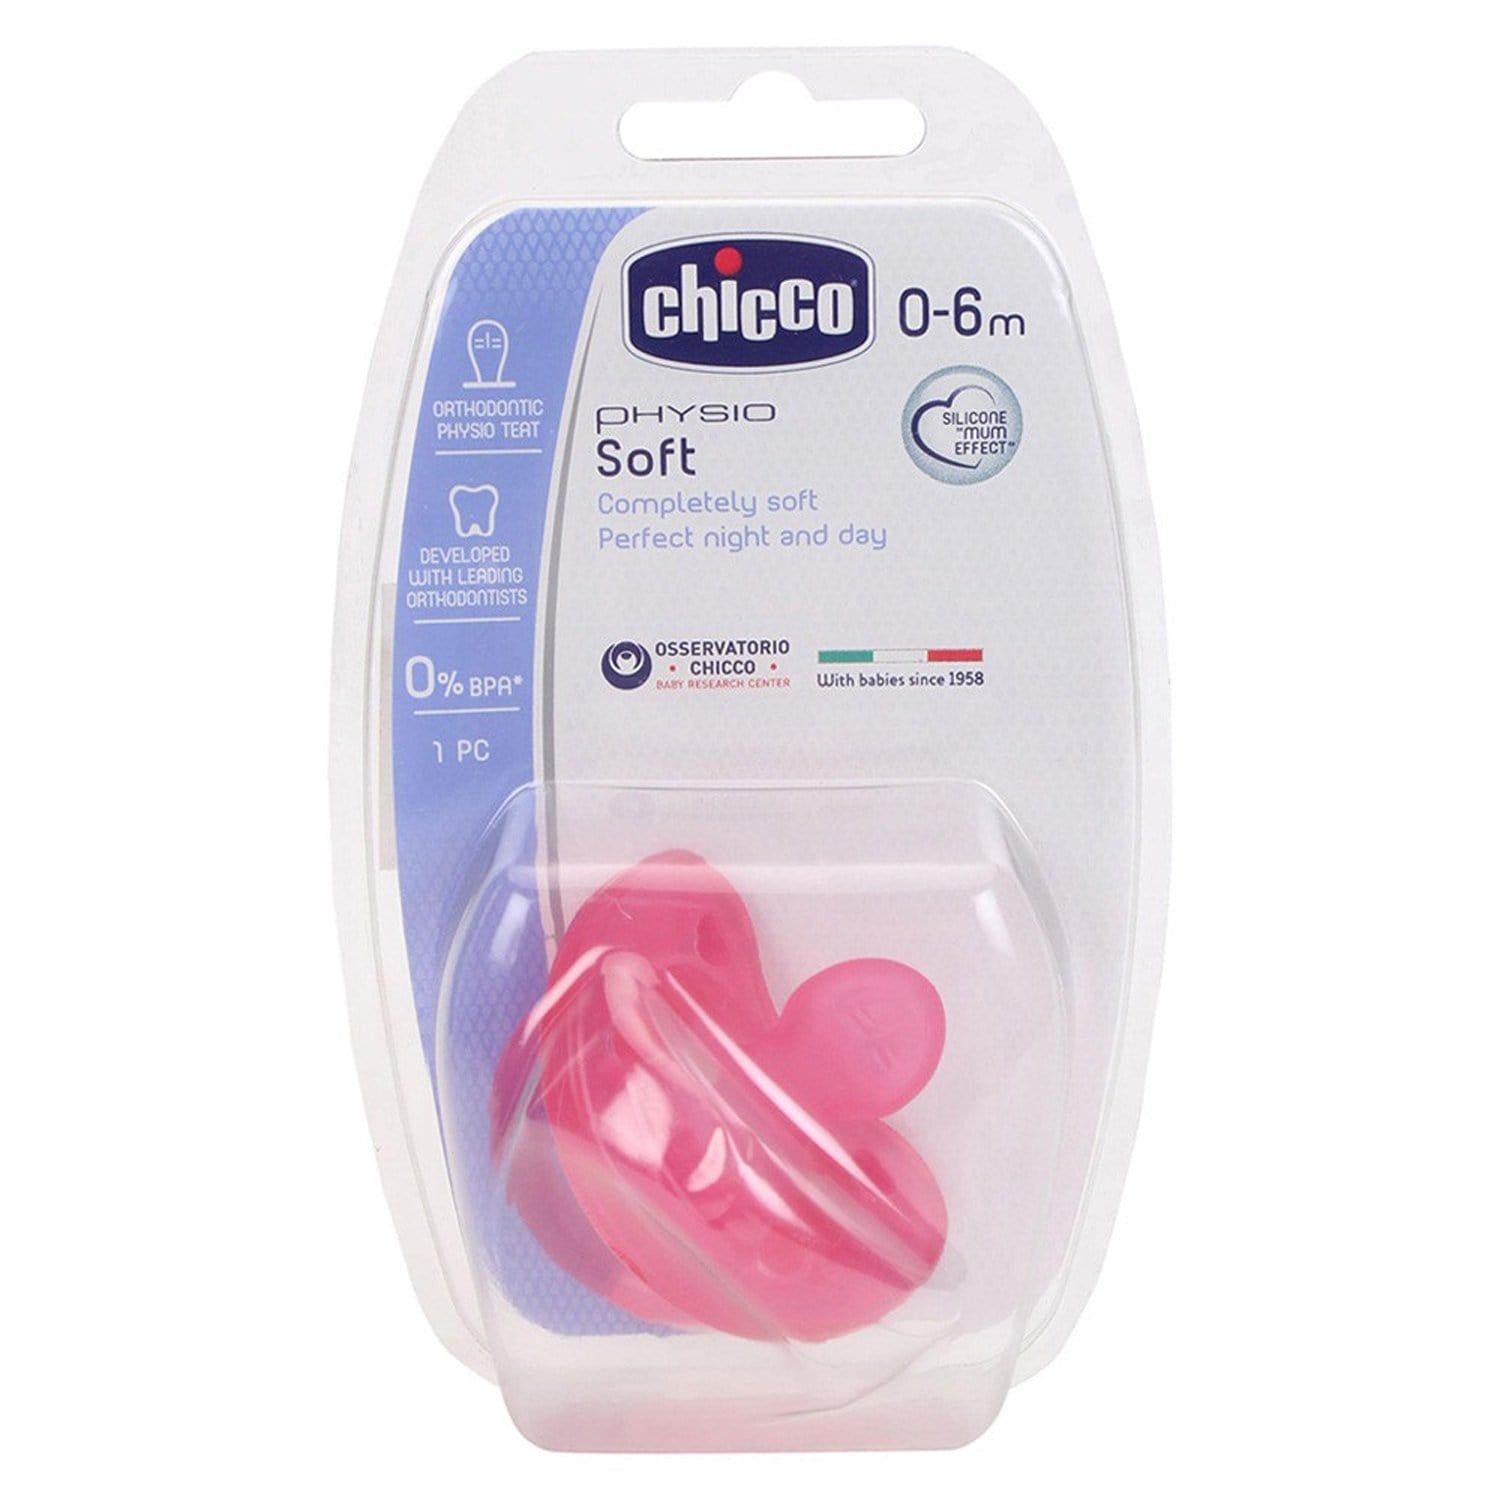 CHICCO PHYSIO SOFT PINK 0-6M 1PC